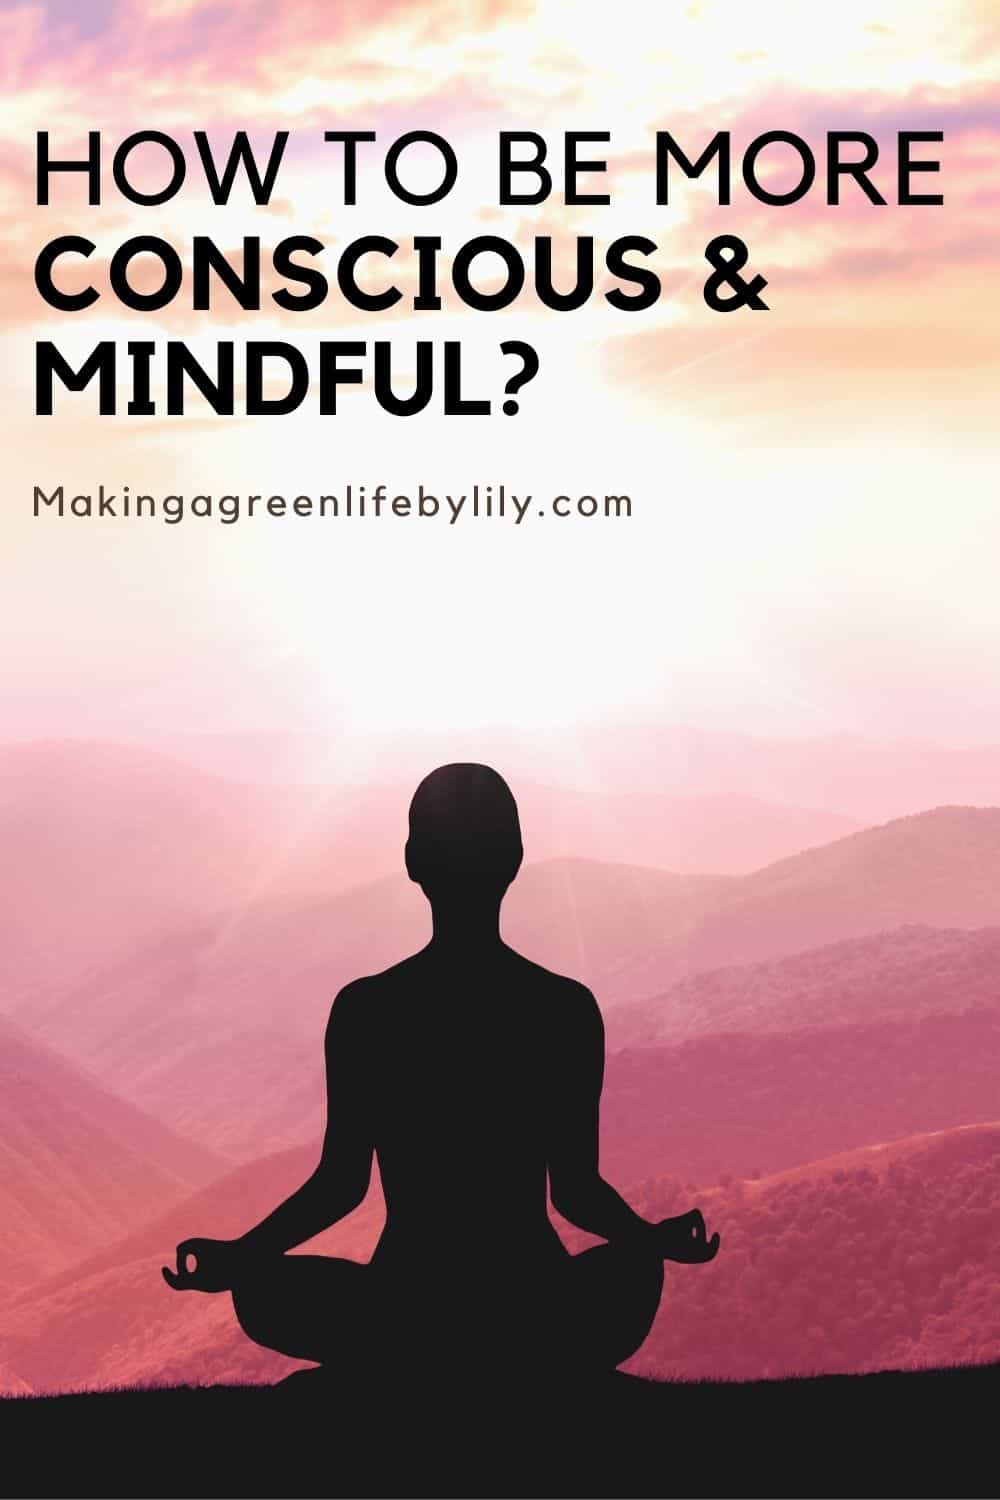 How to be more conscious and mindful